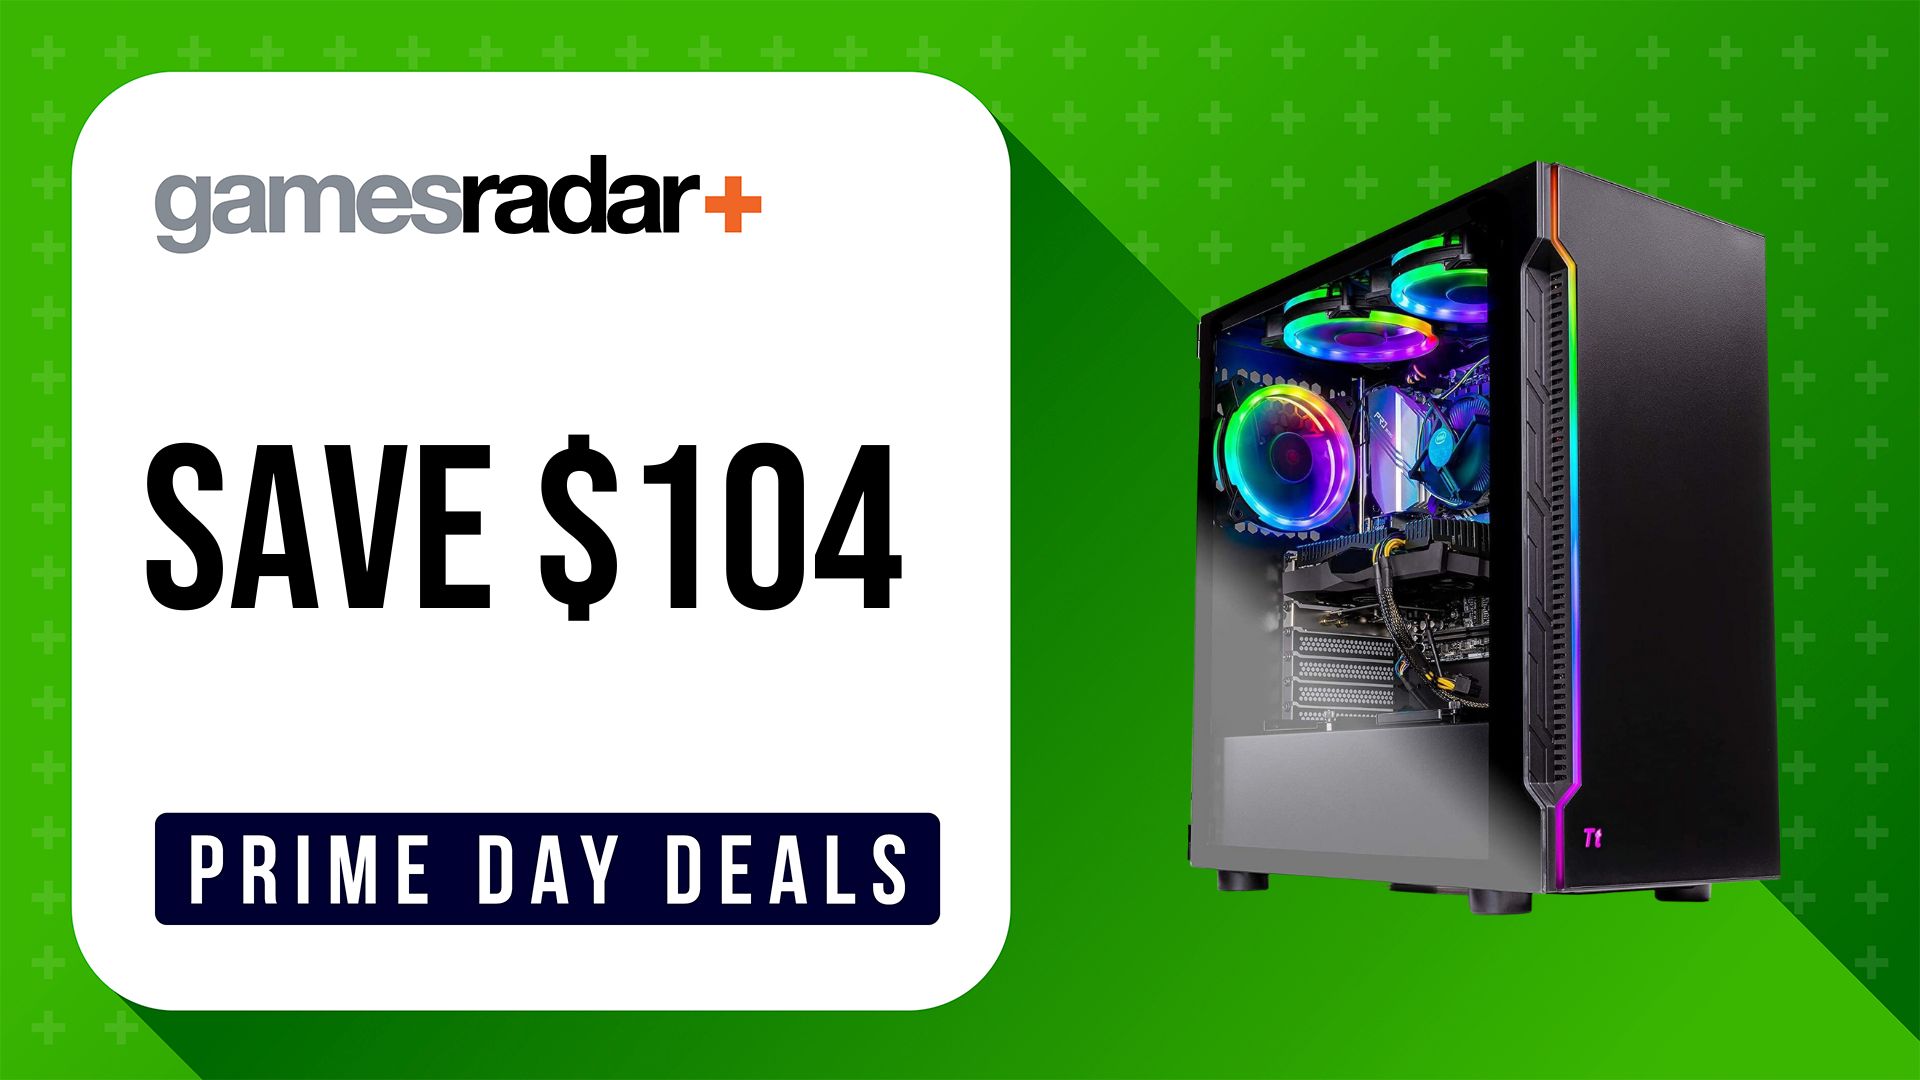 Skytech Shadow Prime Day gaming PC deals with green background and $104 saving stamp